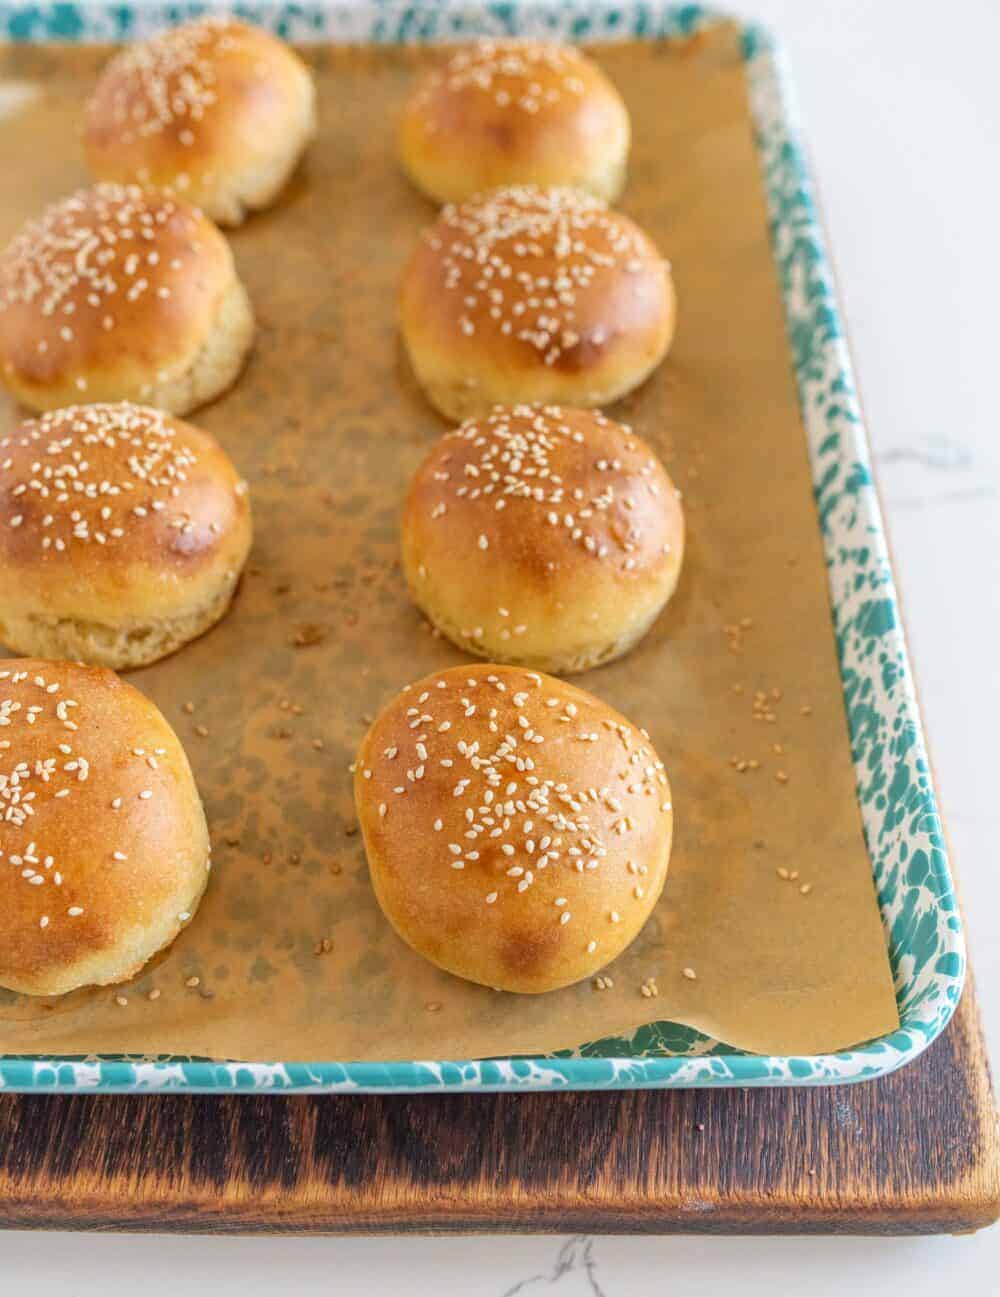 sourdough buns after baking with sesame seeds on top